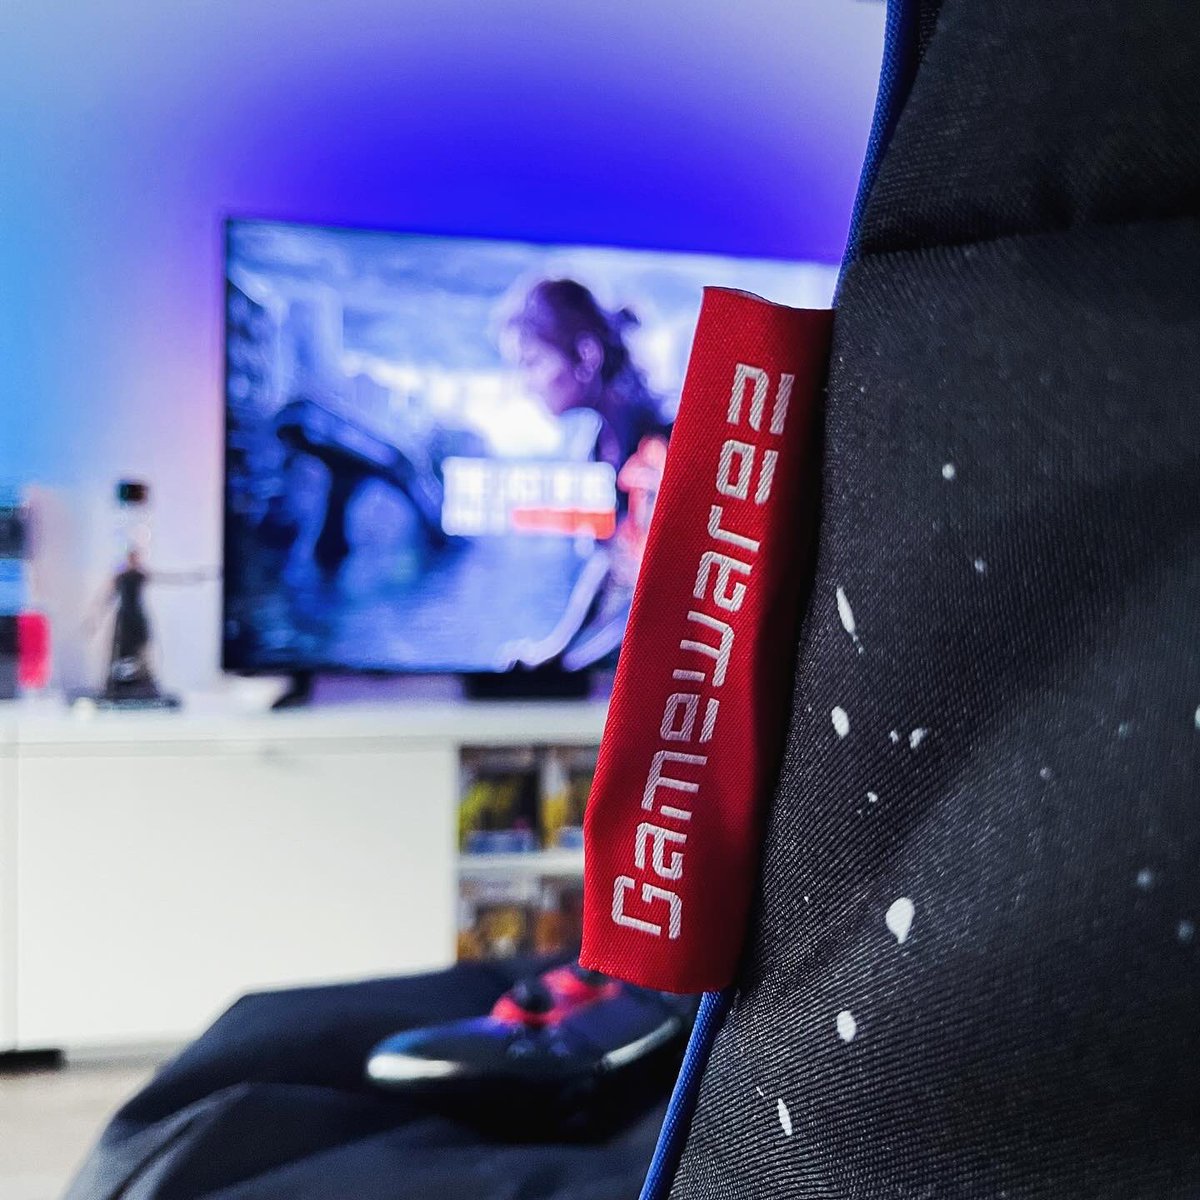 The Arctic X-Ray beanbag from @_Relaxed_Gaming is a perfect addition to every game room. It gives you real comfort, has side pockets to store food, drinks or controllers. And besides this all, it also looks really epic🤩 #Gaming #Gameroom #Videogames #TheLastofUsPart2Remastered